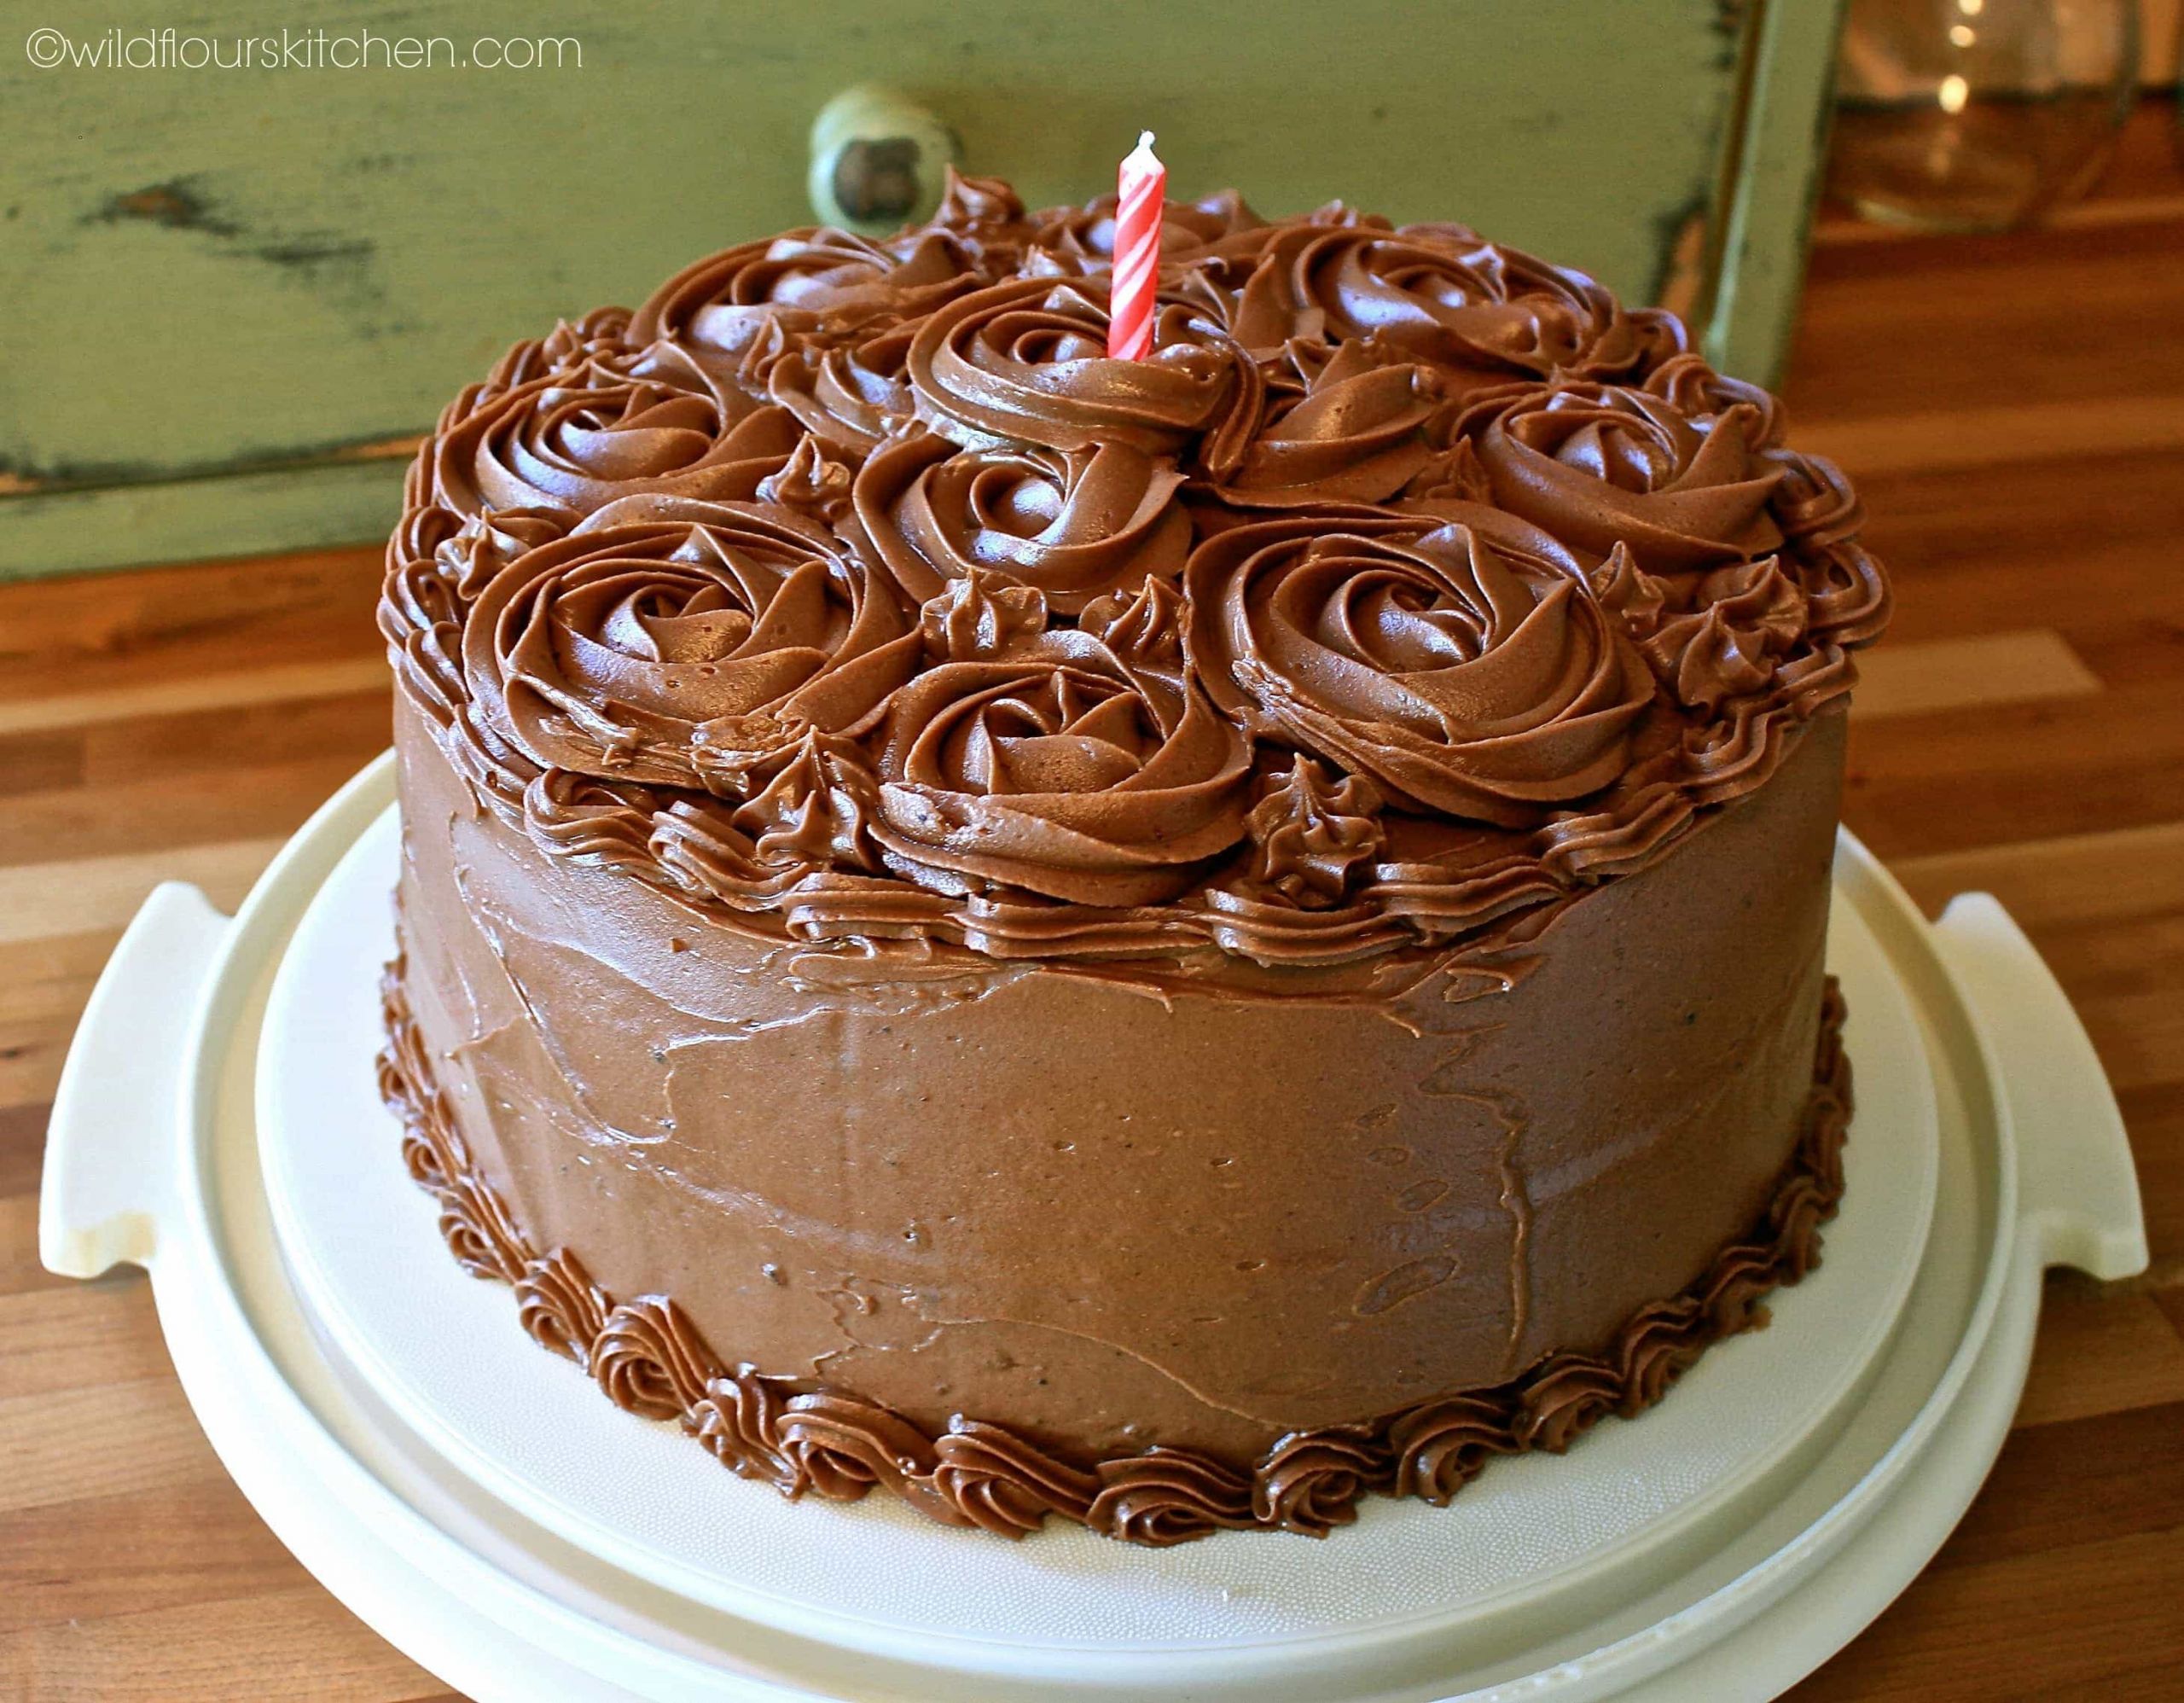 Classic Birthday Cake Recipes
 Classic Chocolate Birthday Cake with a touch of Espresso